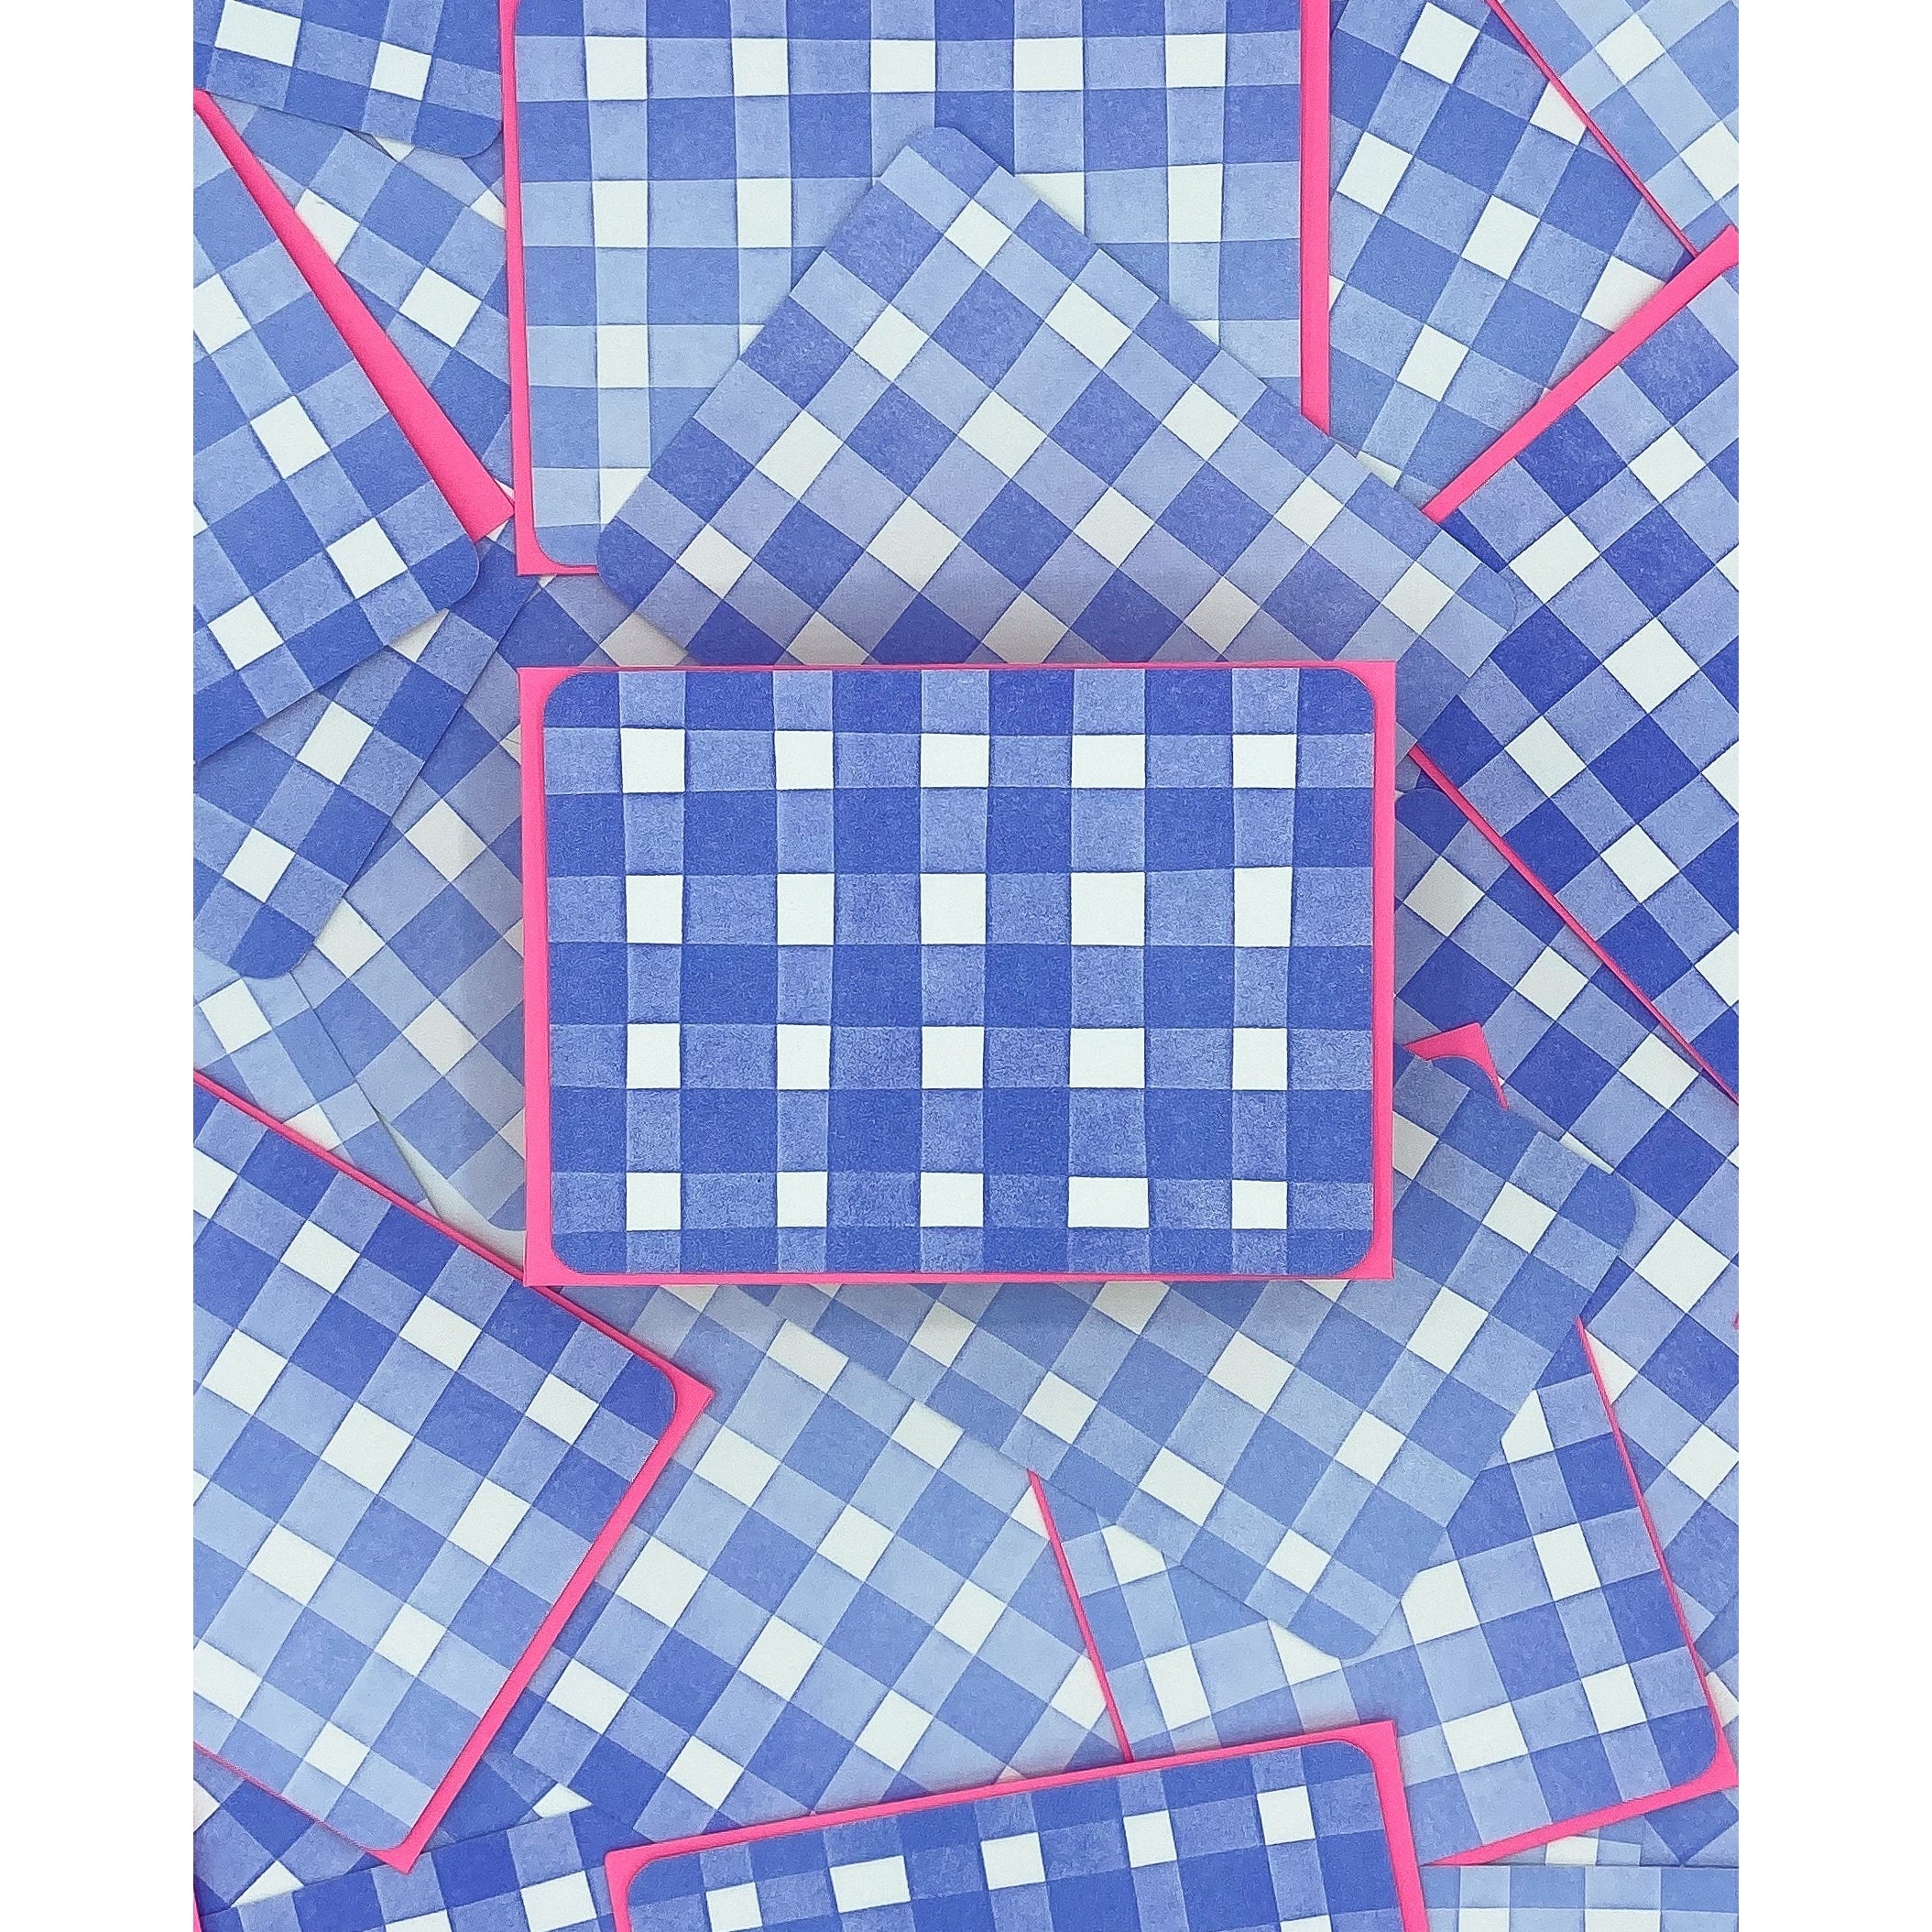 Lavender and white gingham patterned cards with hot pink envelopes.           